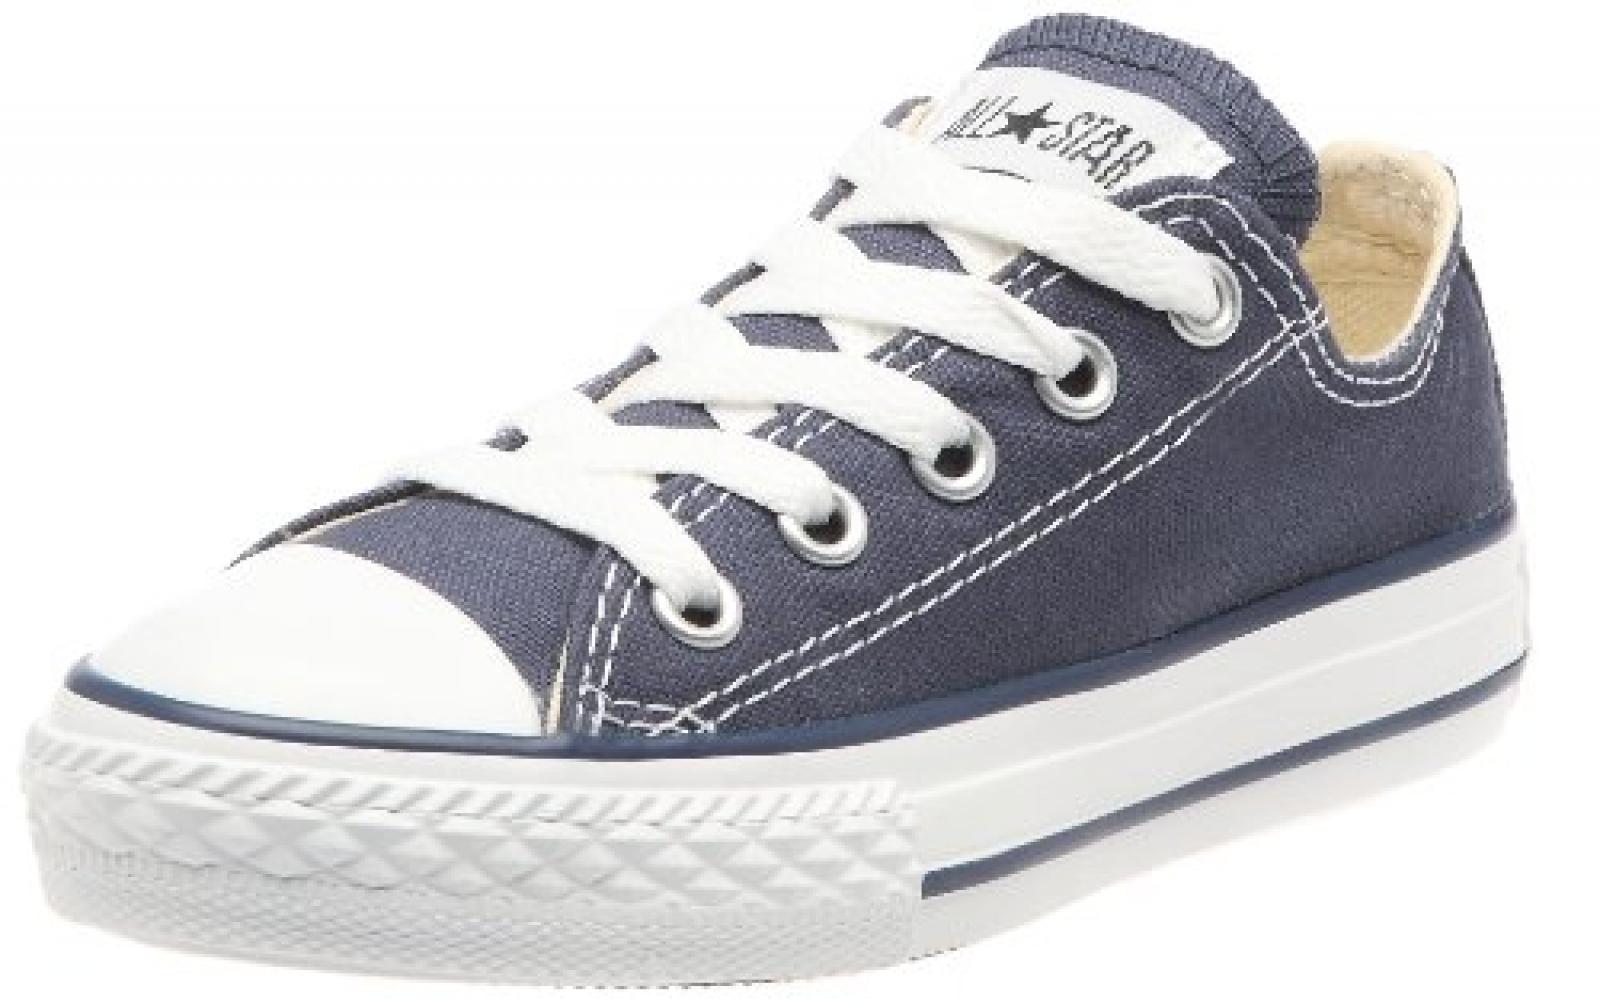 Converse Chuck Taylor All Star Core Ox, Unisex - Kinder Sneaker 